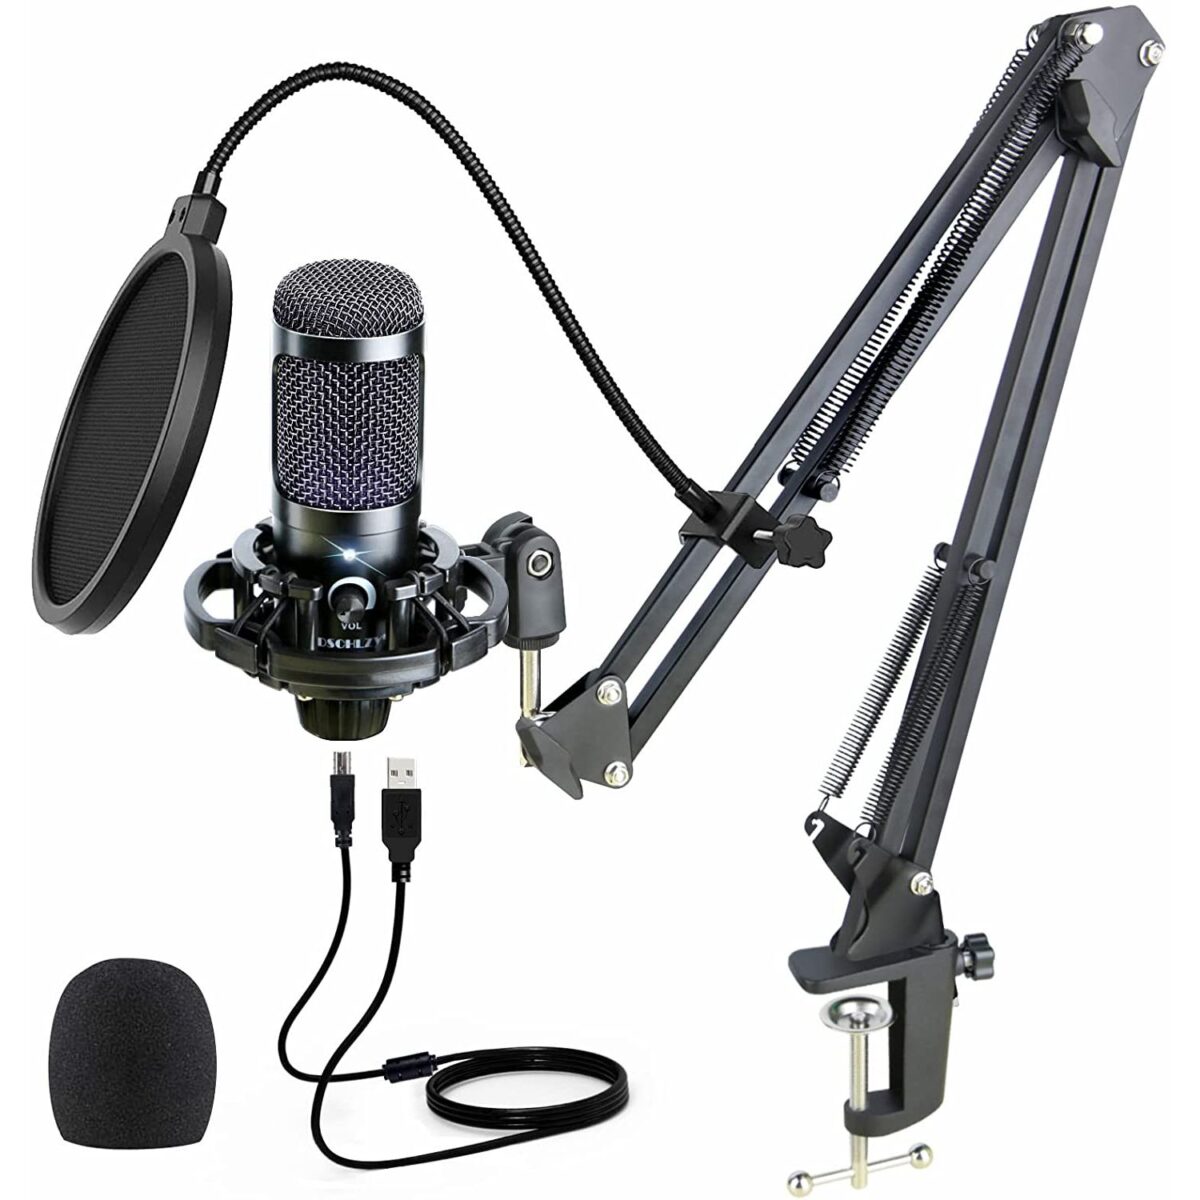 Professional Condenser Podcast Broadcasting & Recording Microphone Mic Studio Singing Cardioid Boom Arm Pop Filter Kit Compatible with Camera, DSLR, PC, Laptop, PS4, PS5